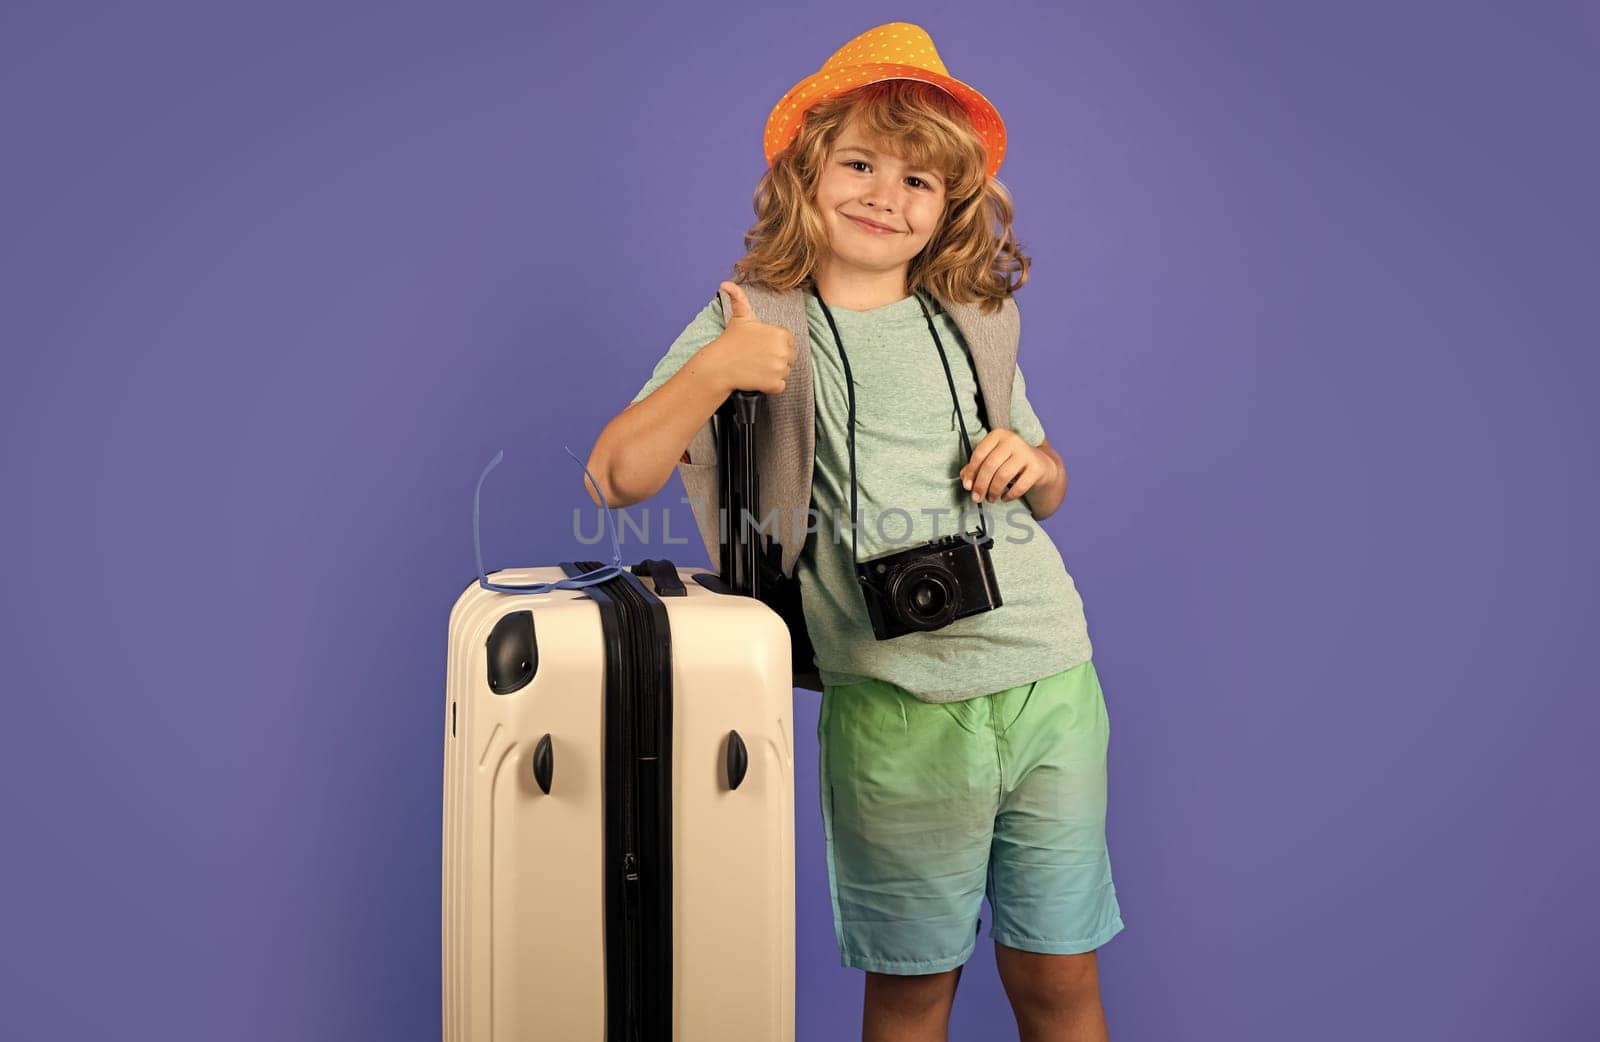 Child traveler with suitcase isolated on studio background. Tourist kid boy. Portrait of child travel with travel bag. Travel, adventure, vacation